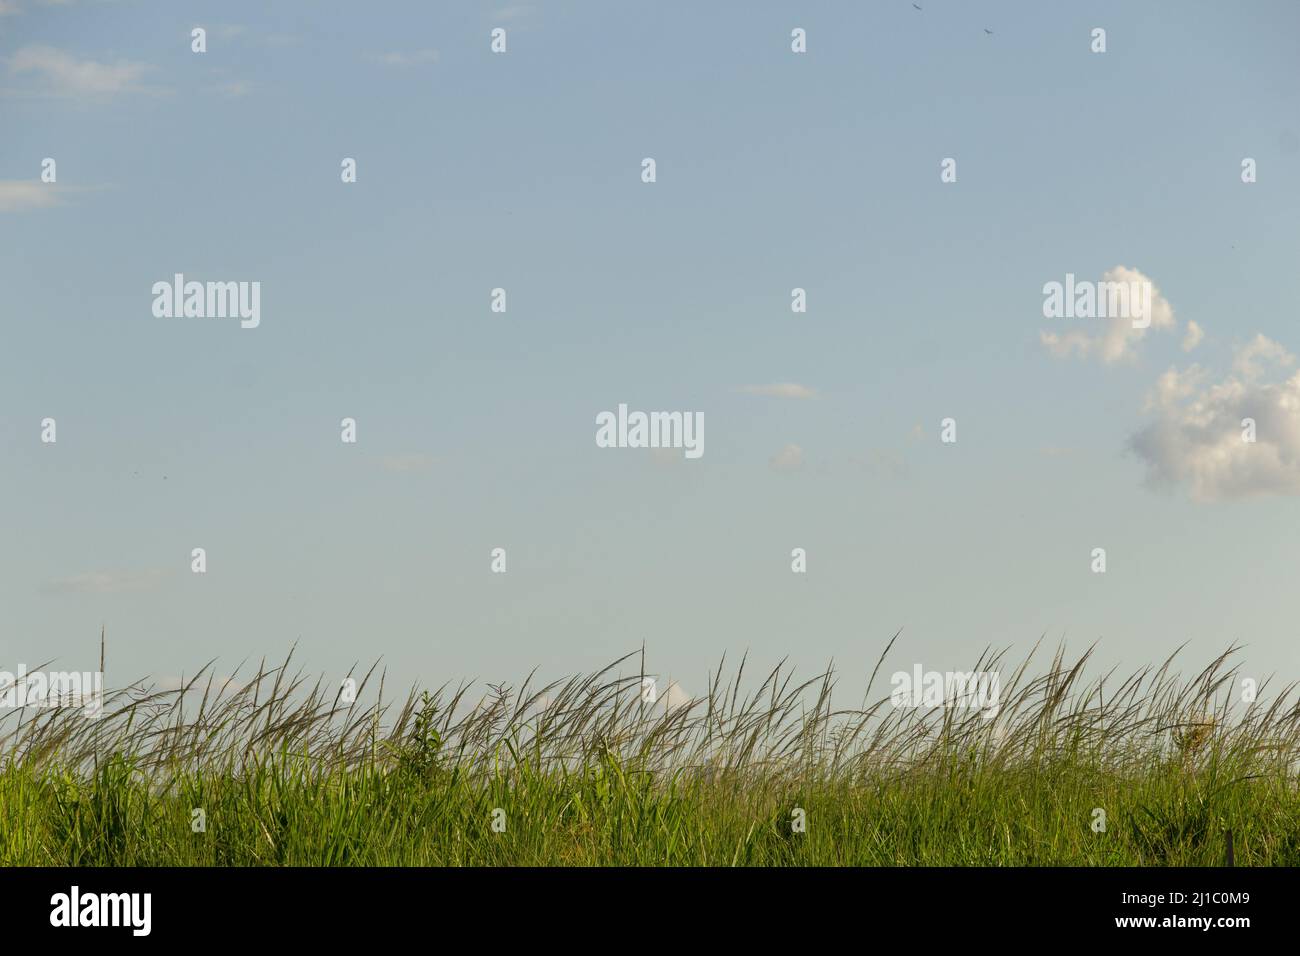 Goiânia, Goias, Brazil – March 22, 2022: Grass and blue sky with some clouds. A minimalist landscape. Stock Photo